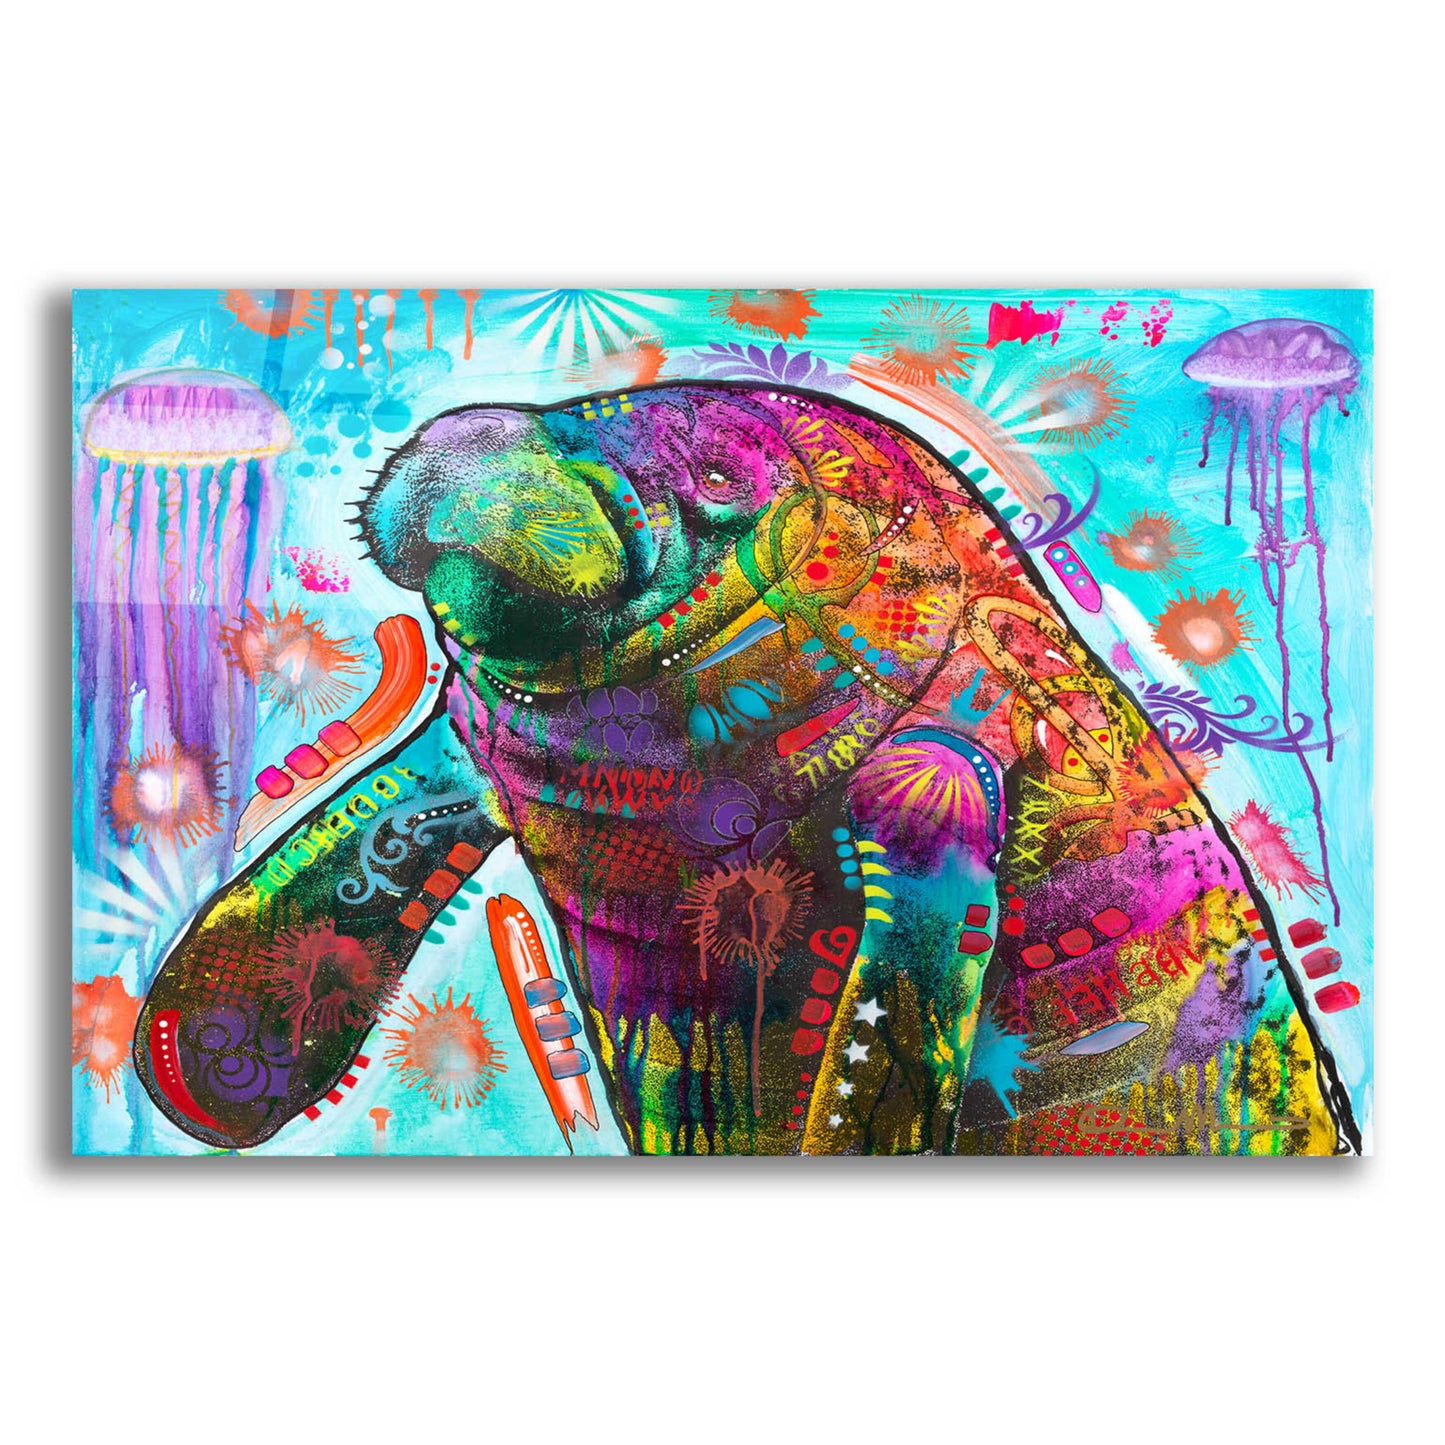 Epic Art 'Manatee' by Dean Russo, Acrylic Glass Wall Art,16x12